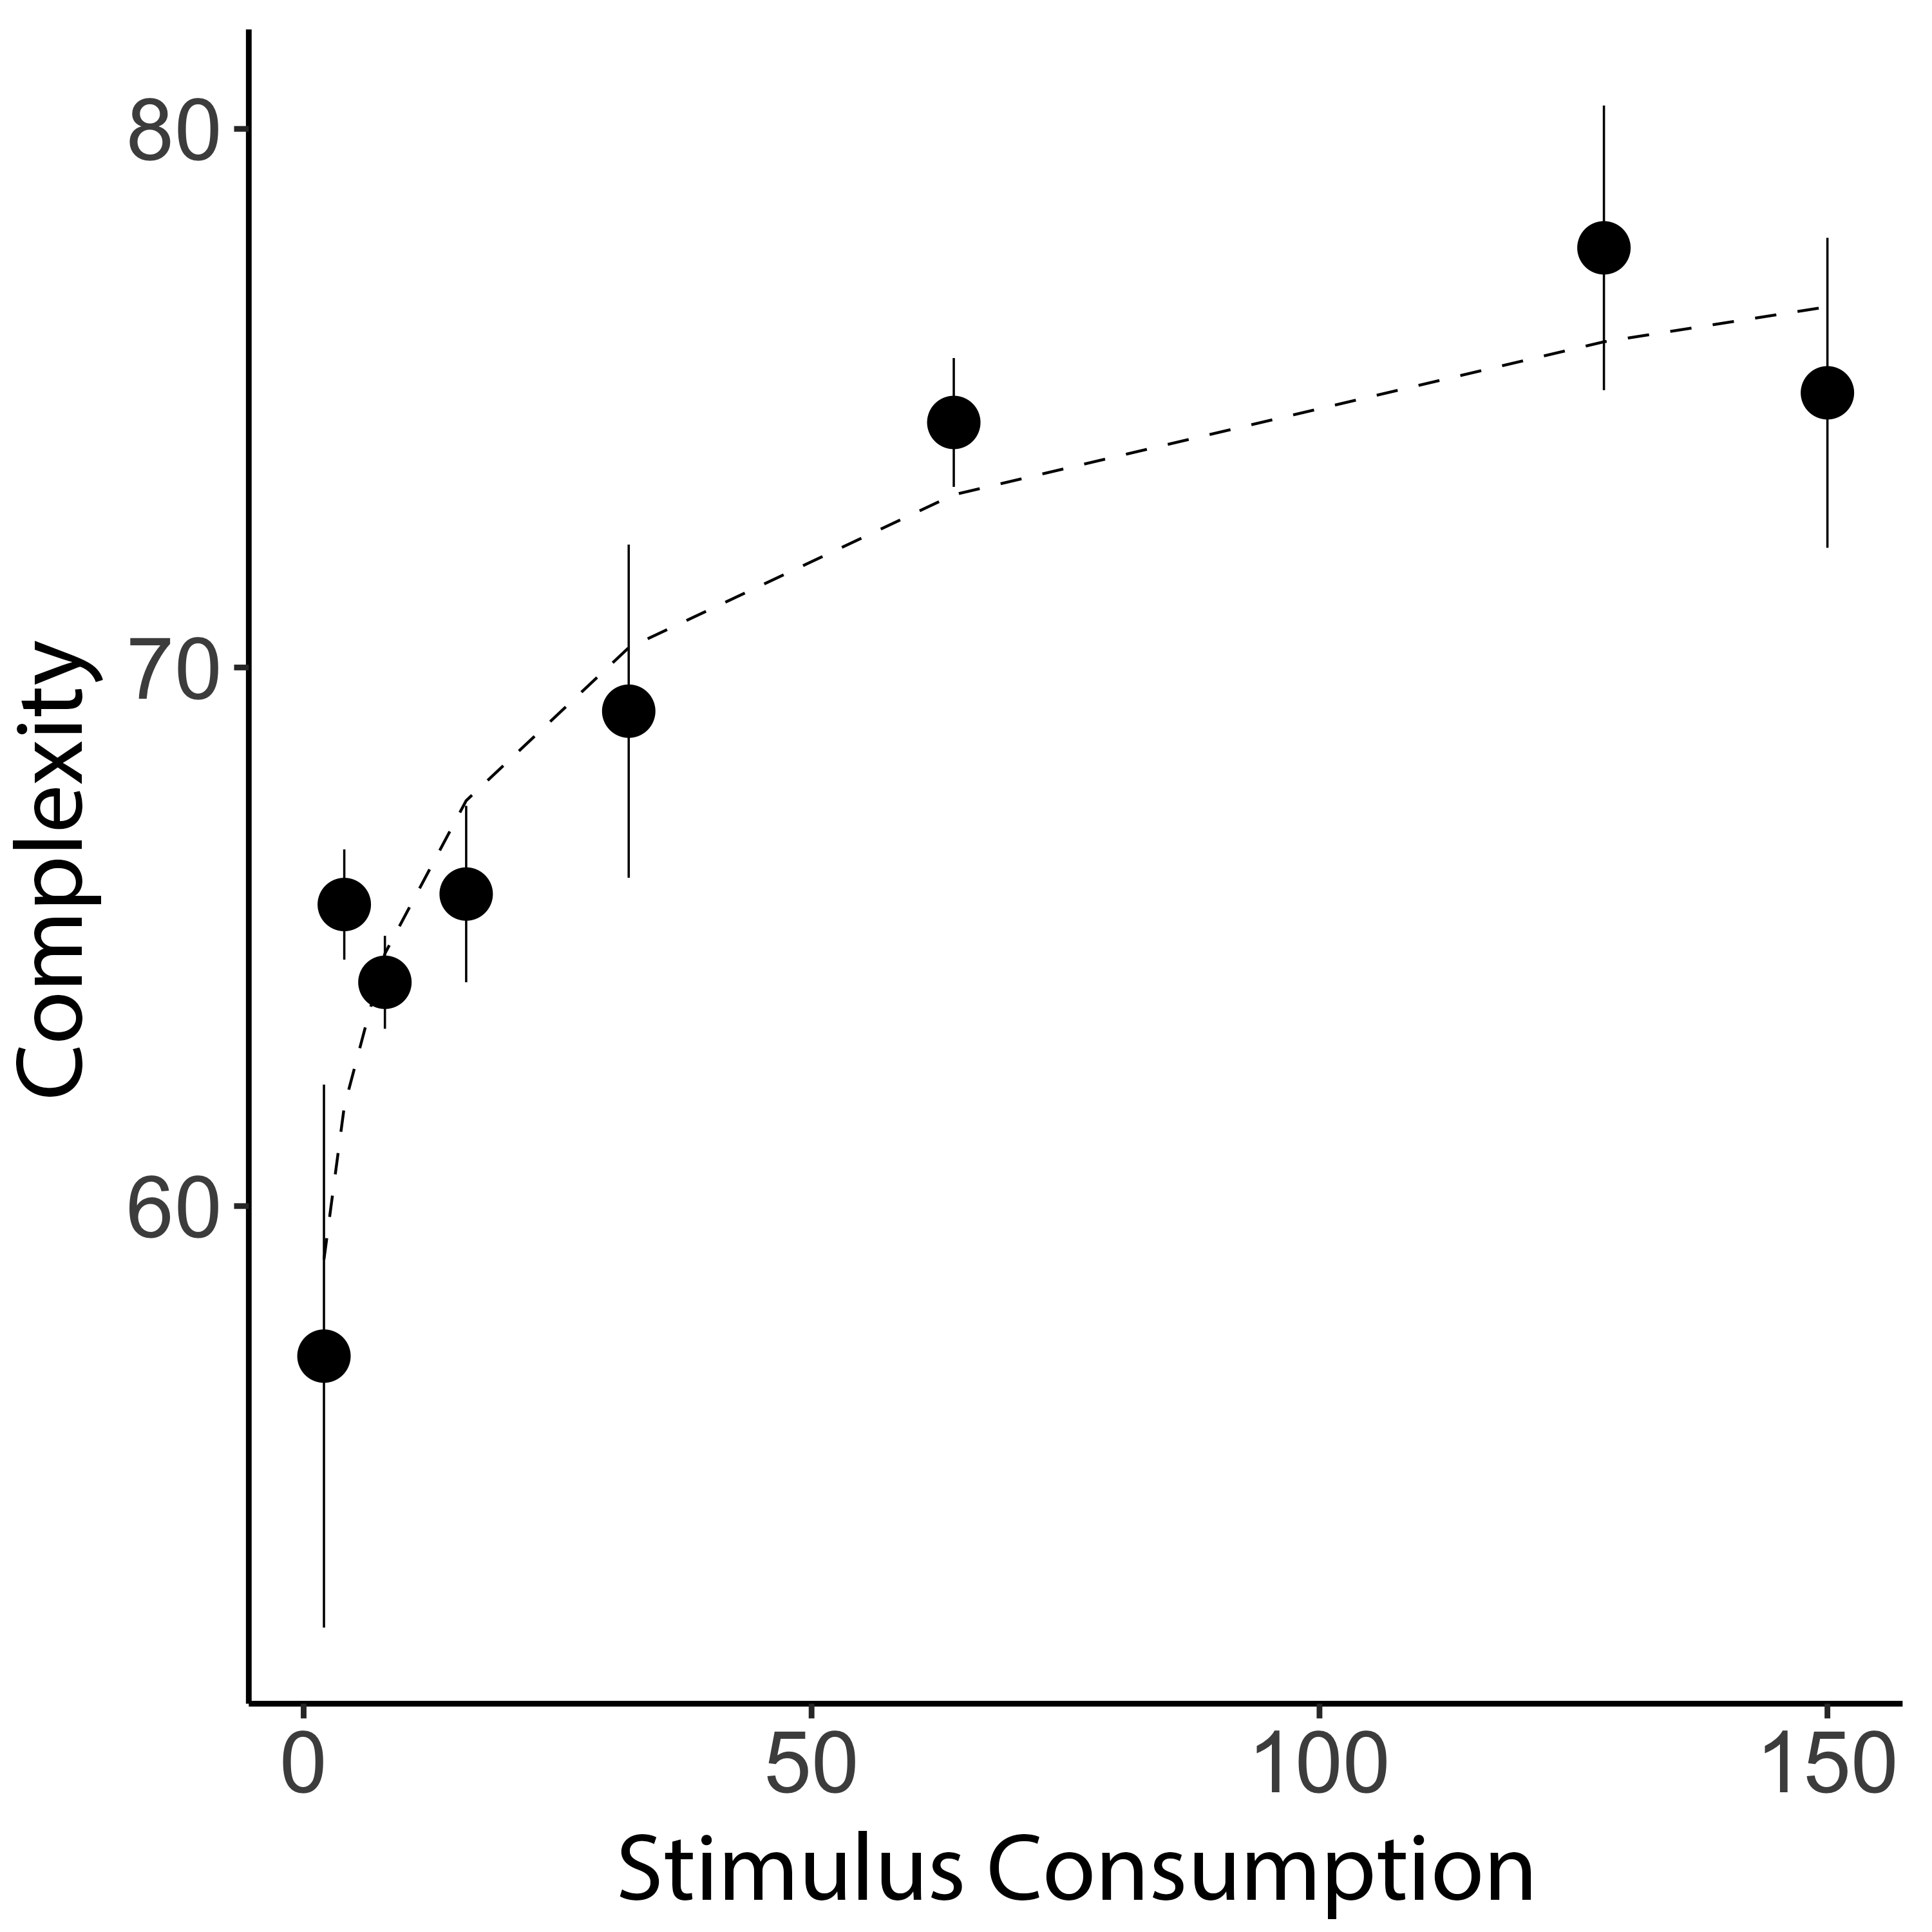 Complexity increases with Stimulus Consumption